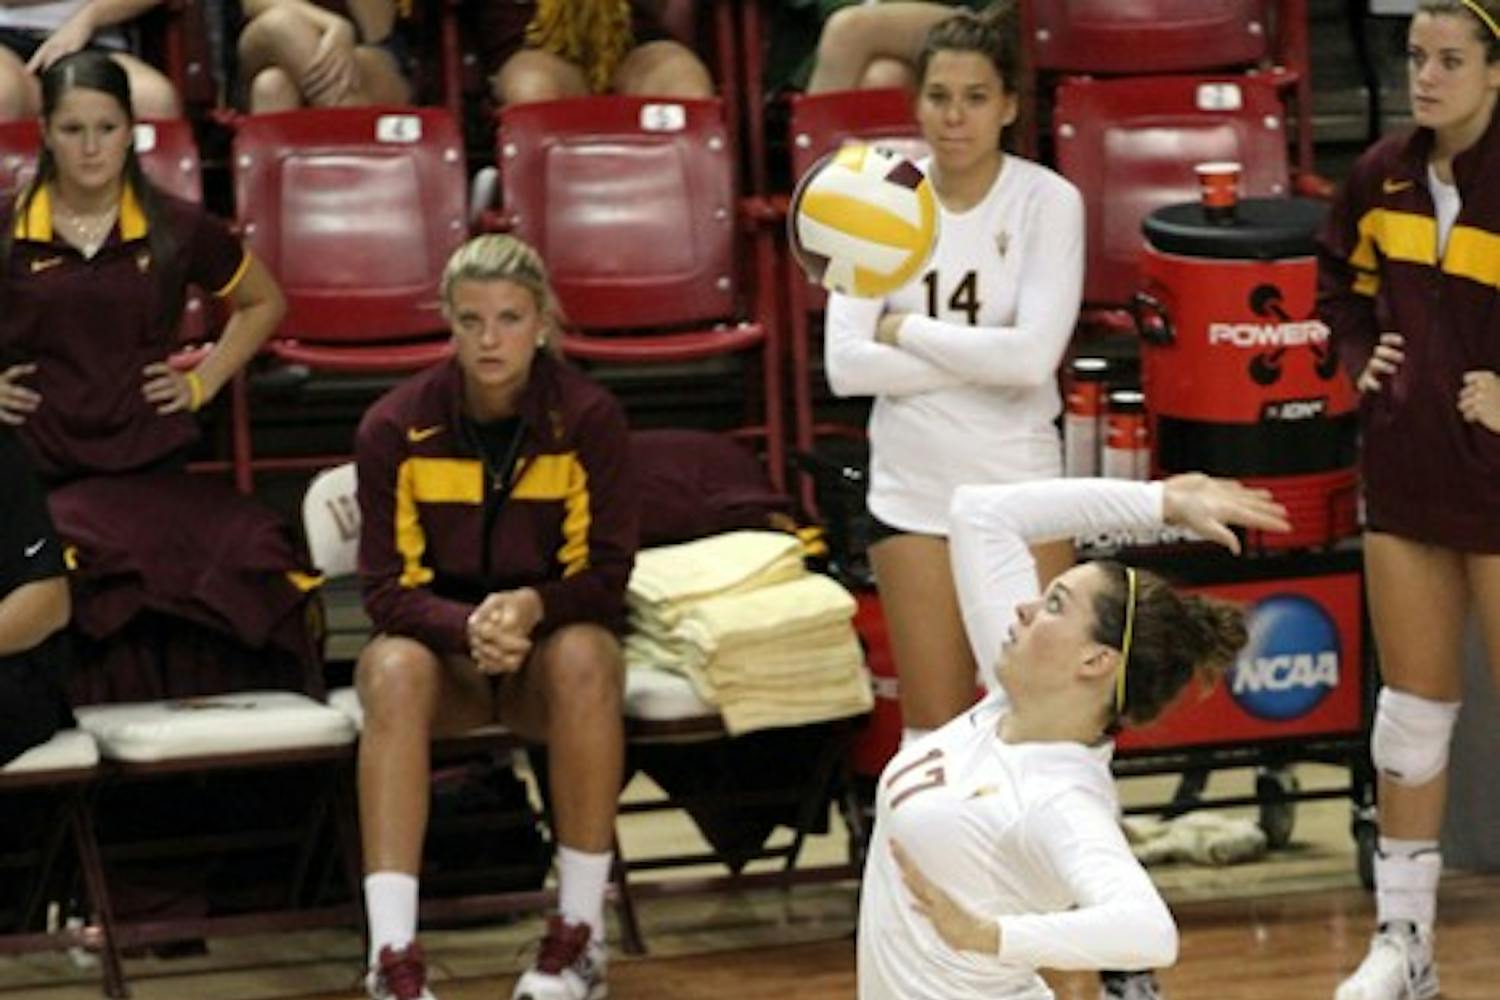 GOING WEST: Sophomore outside hitter Bethany Jorgensen serves the ball in the Sun Devils’ meeting against Washington on Sunday. The ASU volleyball team takes on a difficult road stretch over the weekend, facing No. 6 Stanford and No. 4 California. (Photo by Lisa Bartoli)